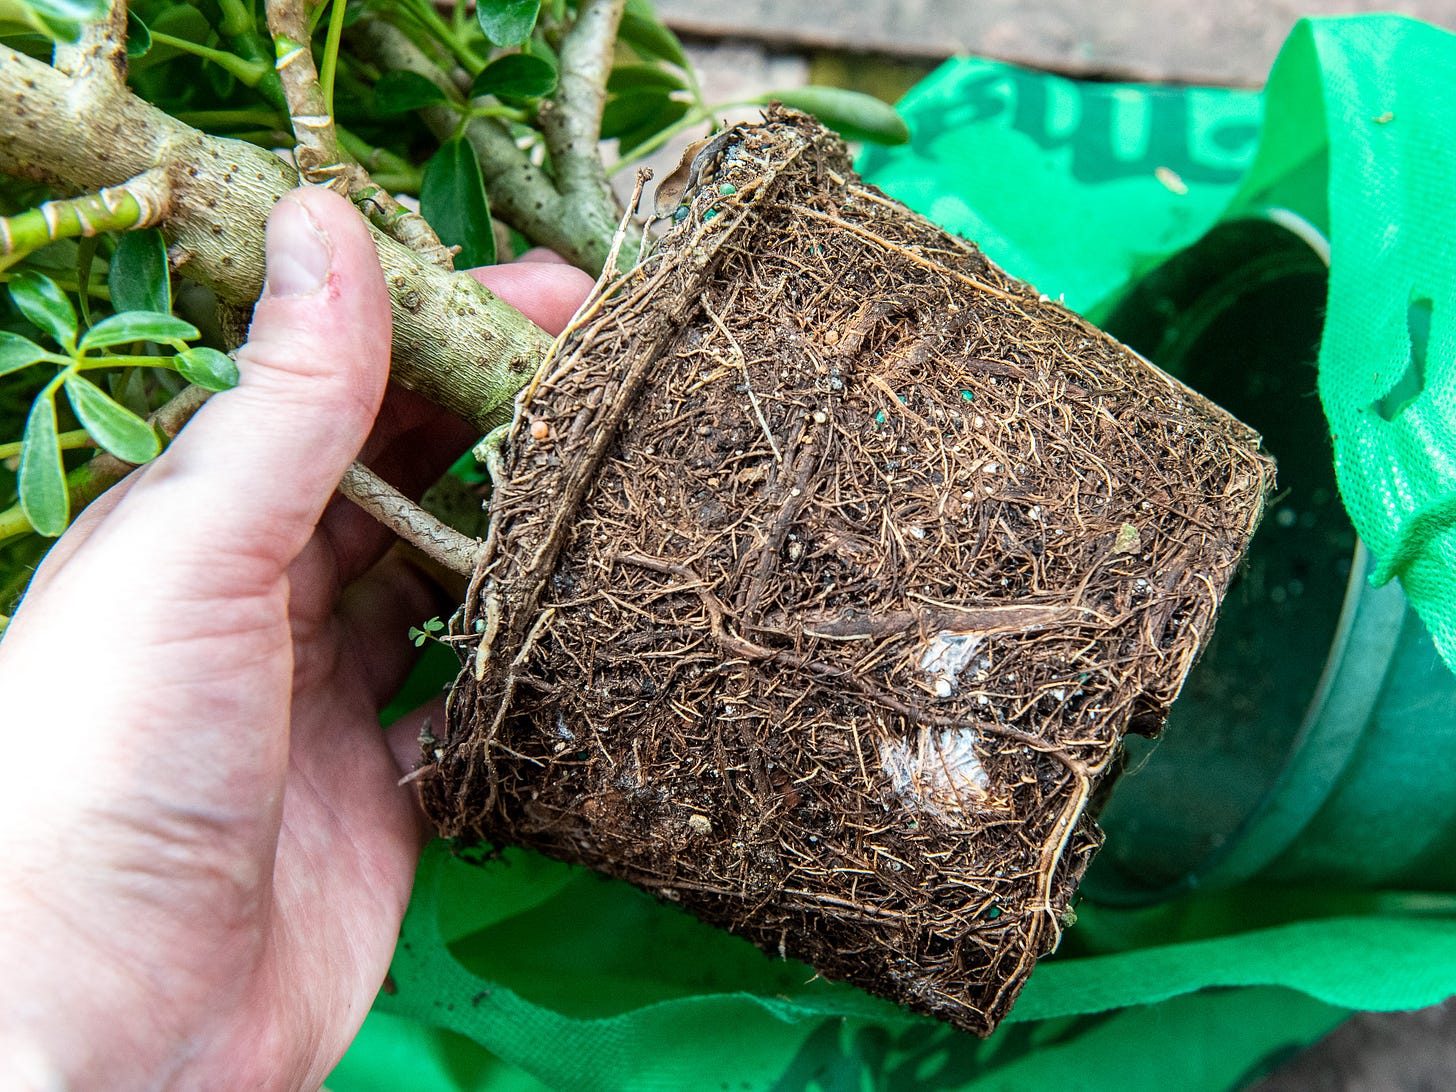 ID: Umbrella tree rootball, removed from growing pot